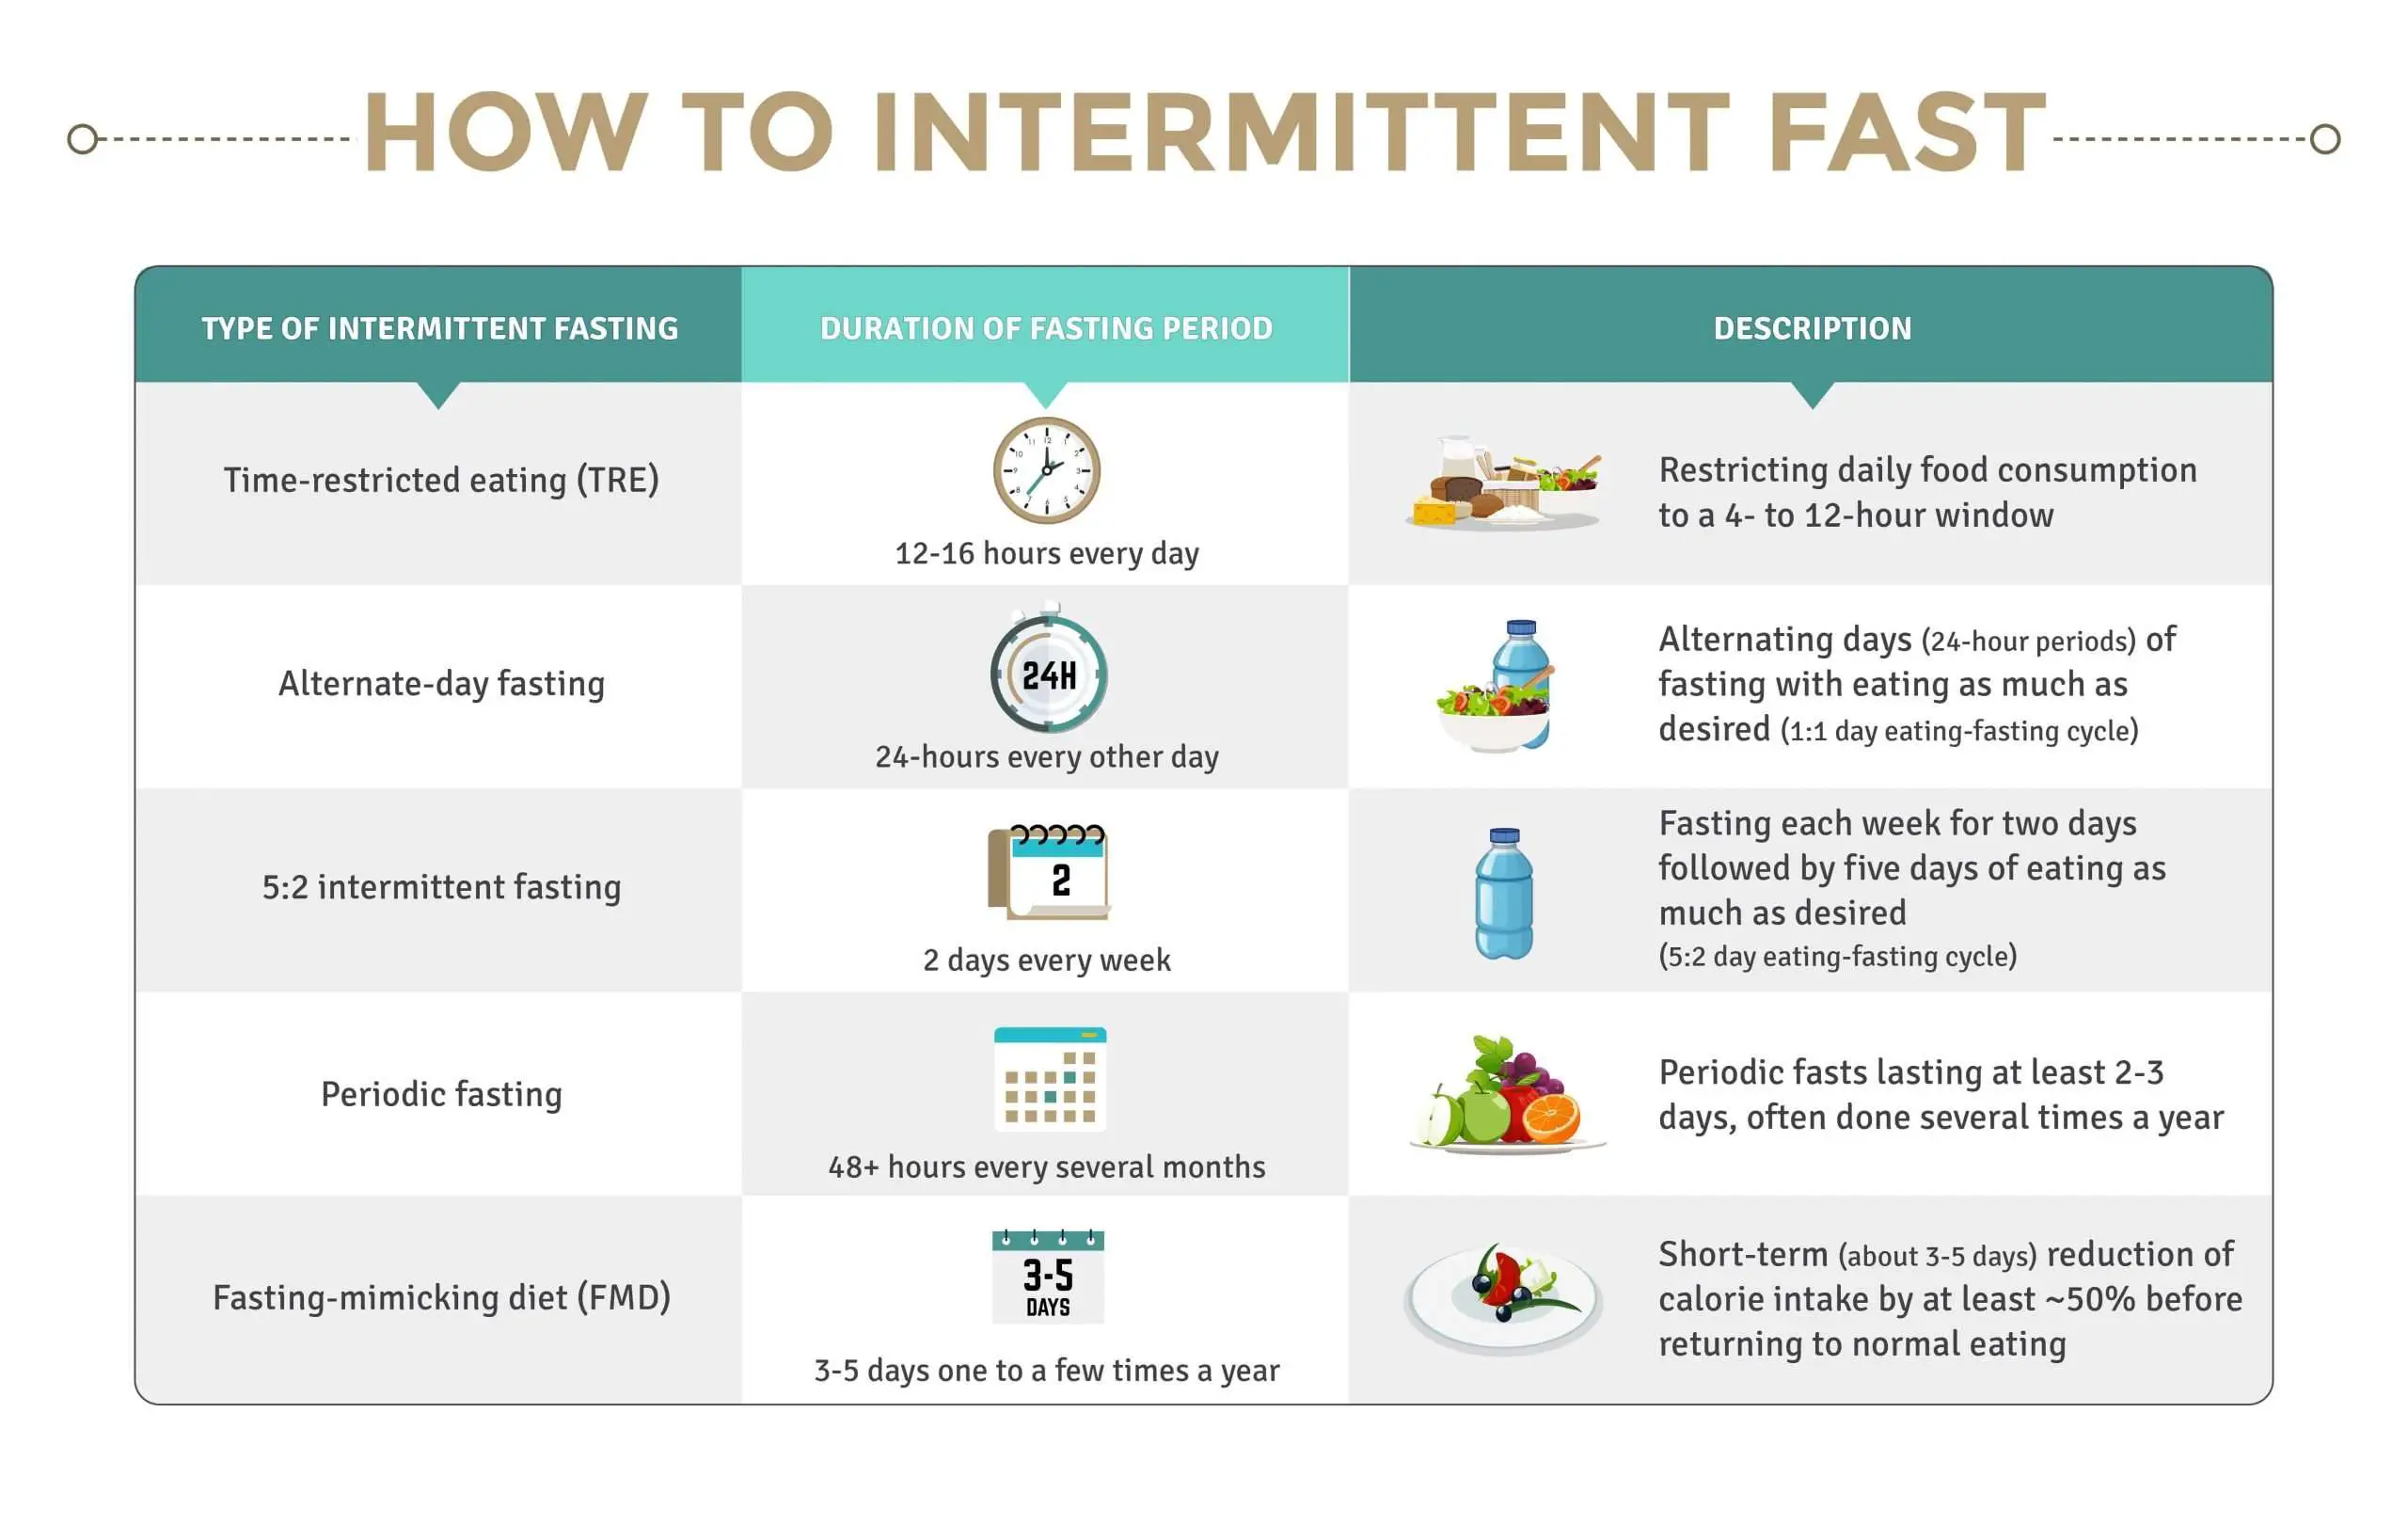 What to Expect While Intermittent Fasting